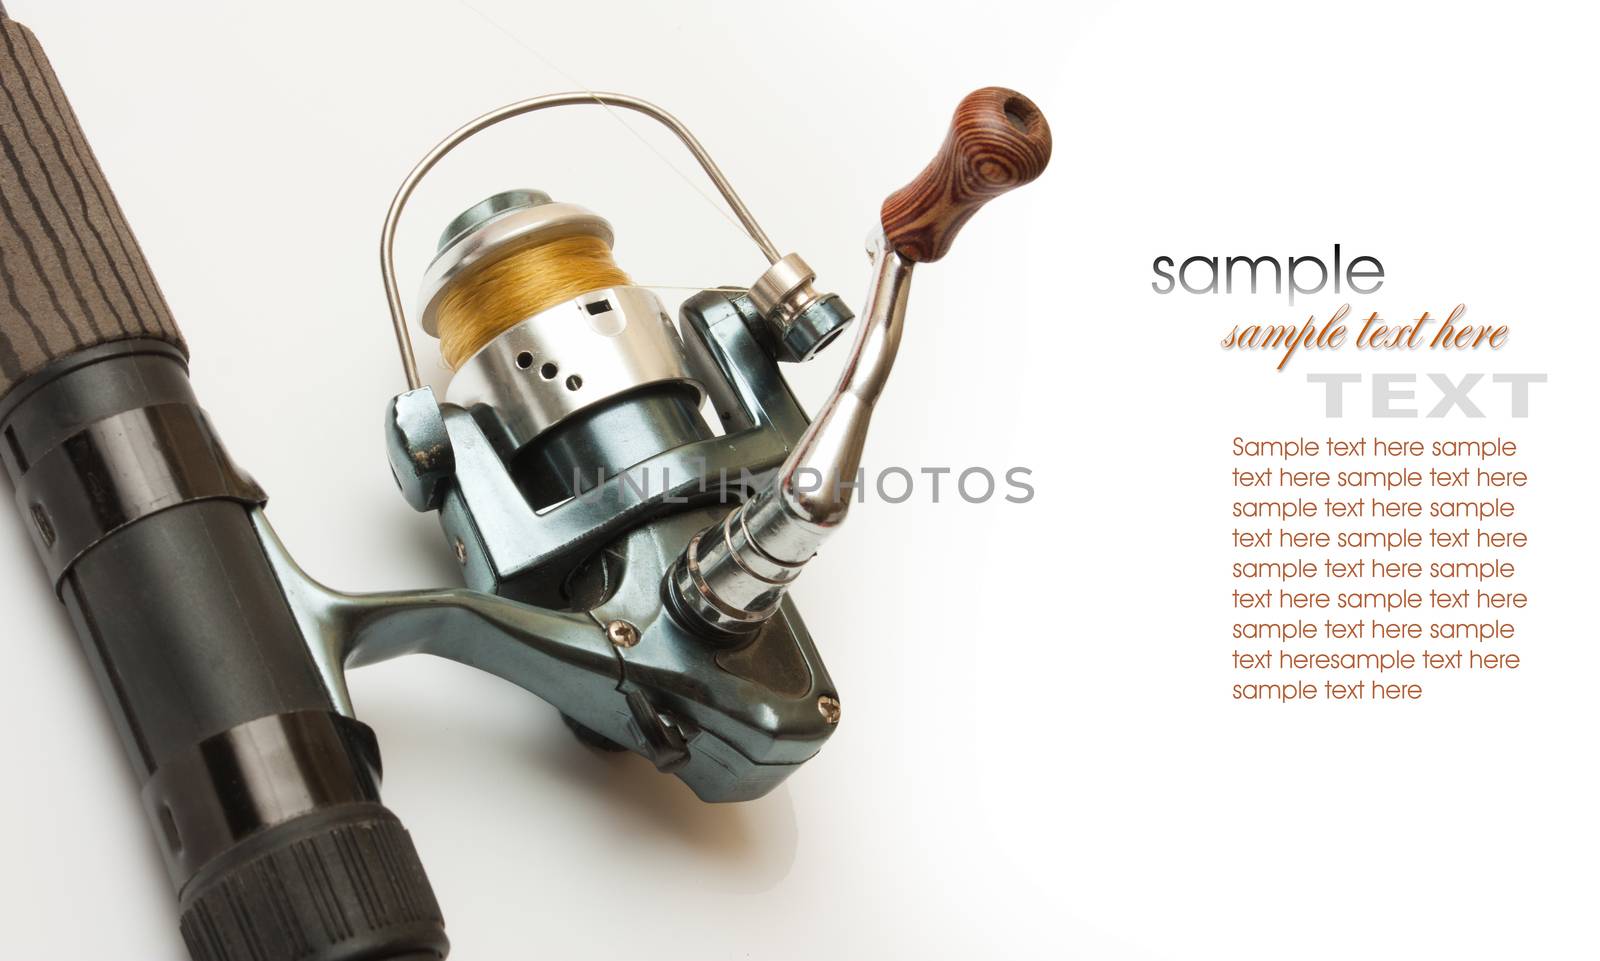 Fishing gear is isolated on a white background